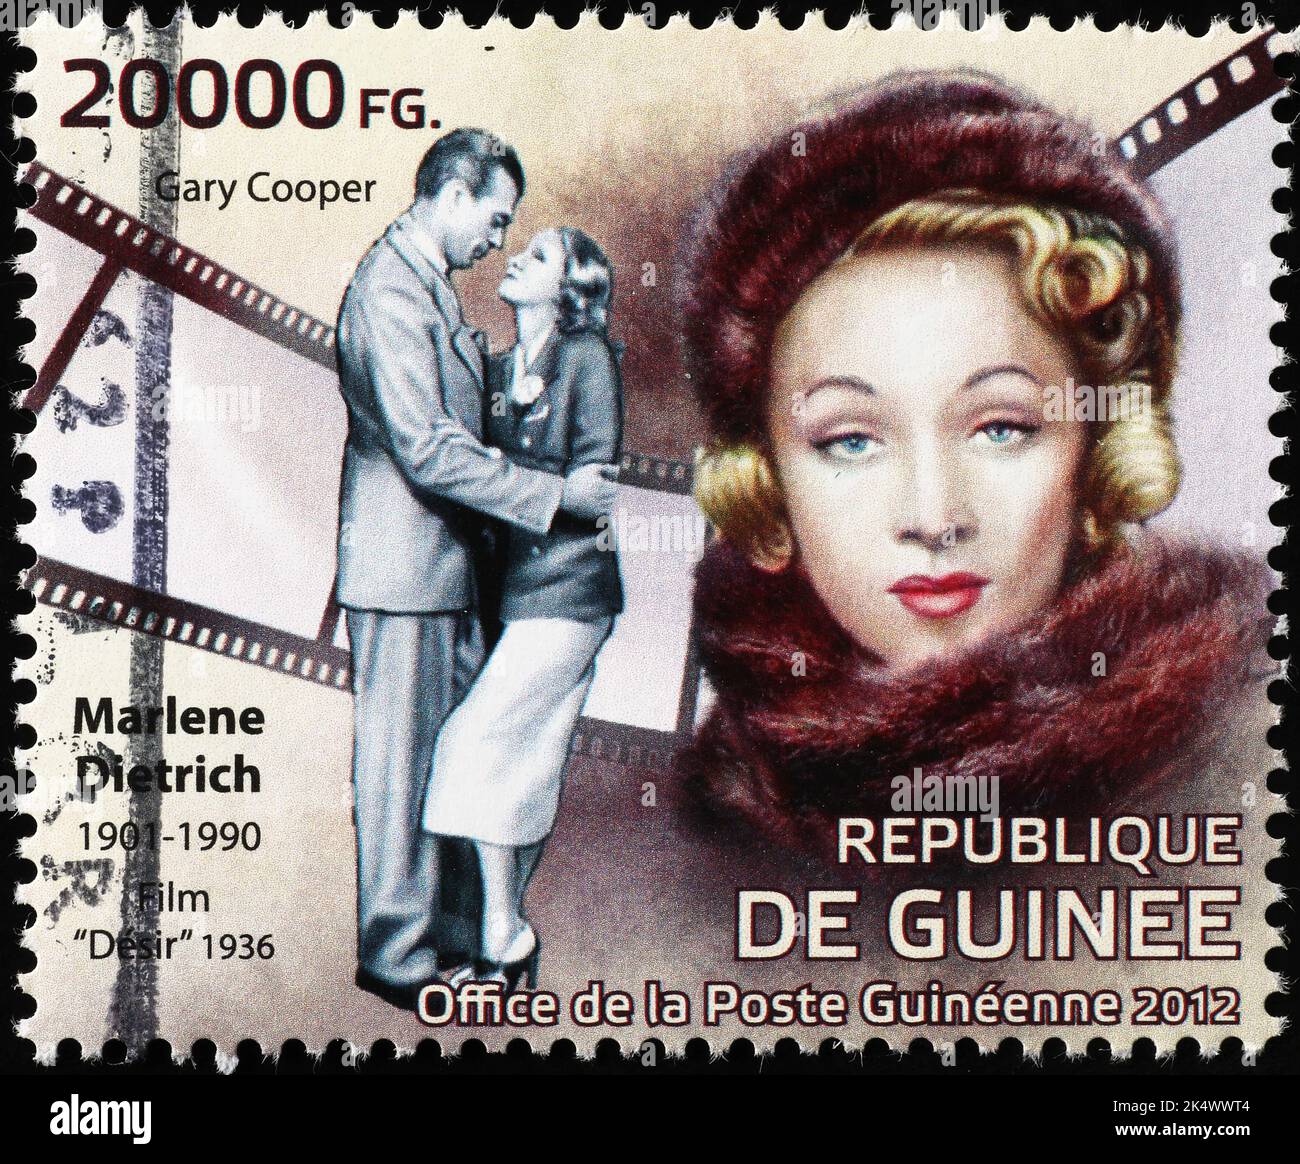 Marlene Dietrich and Gary Cooper on stamp of Guinea Stock Photo - Alamy